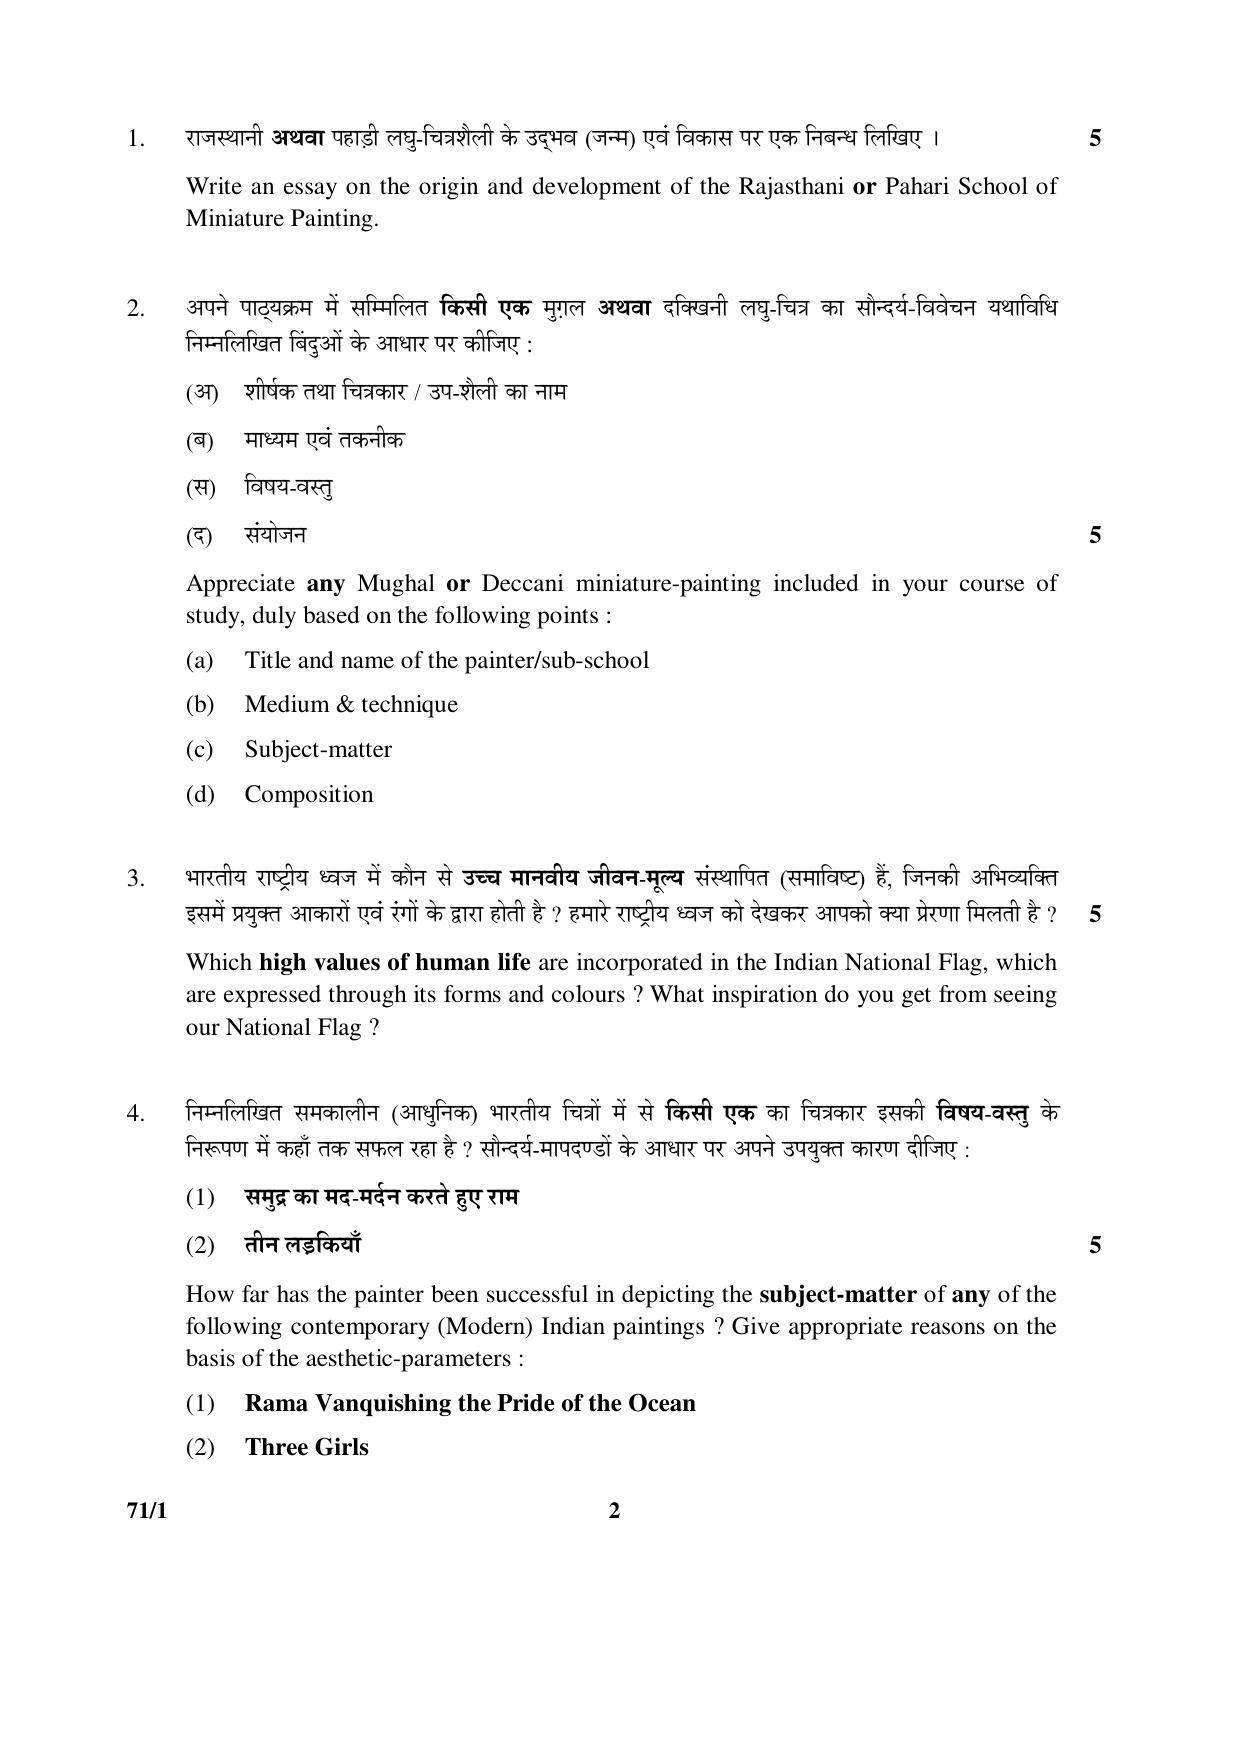 CBSE Class 12 71-1 PAINTING (Theory) 2016 Question Paper - Page 2